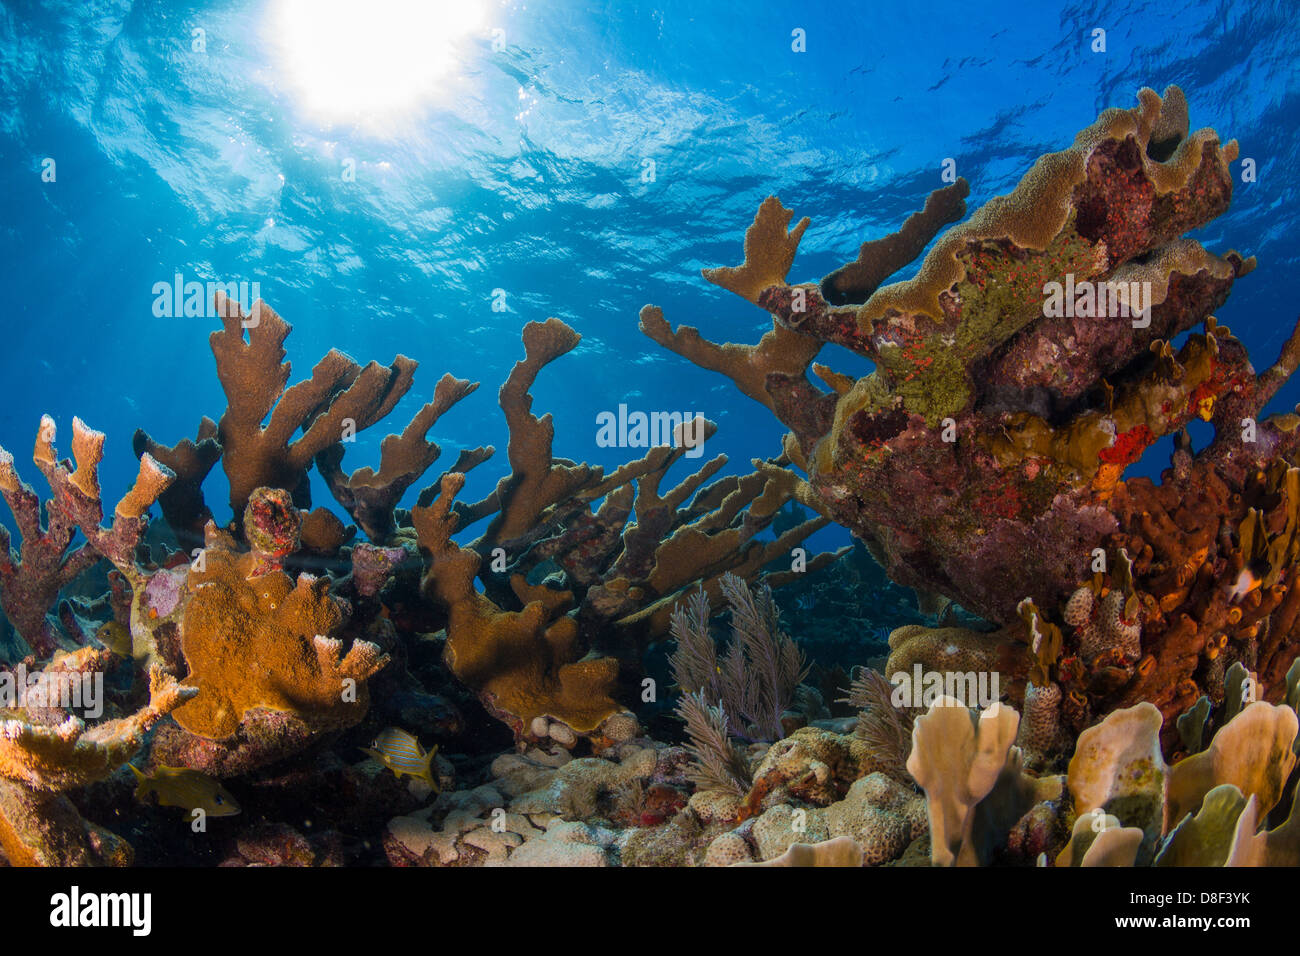 Tropical reef scene of elkhorn coral in Key Largo, Florida. Stock Photo